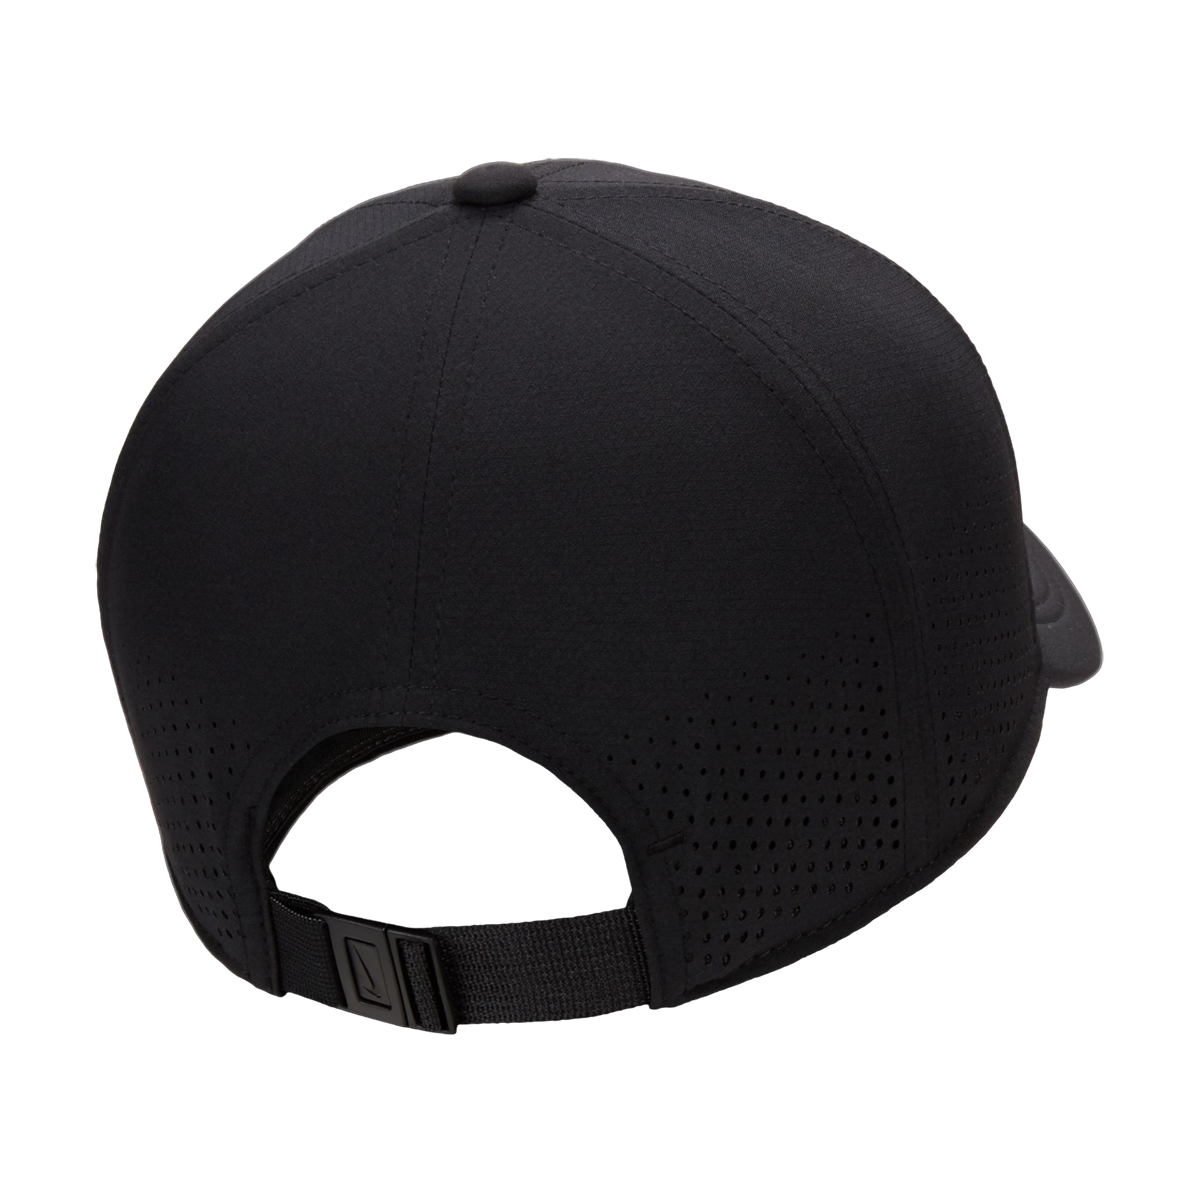 Nike Dri-FIT ADV Club Hat, , large image number null